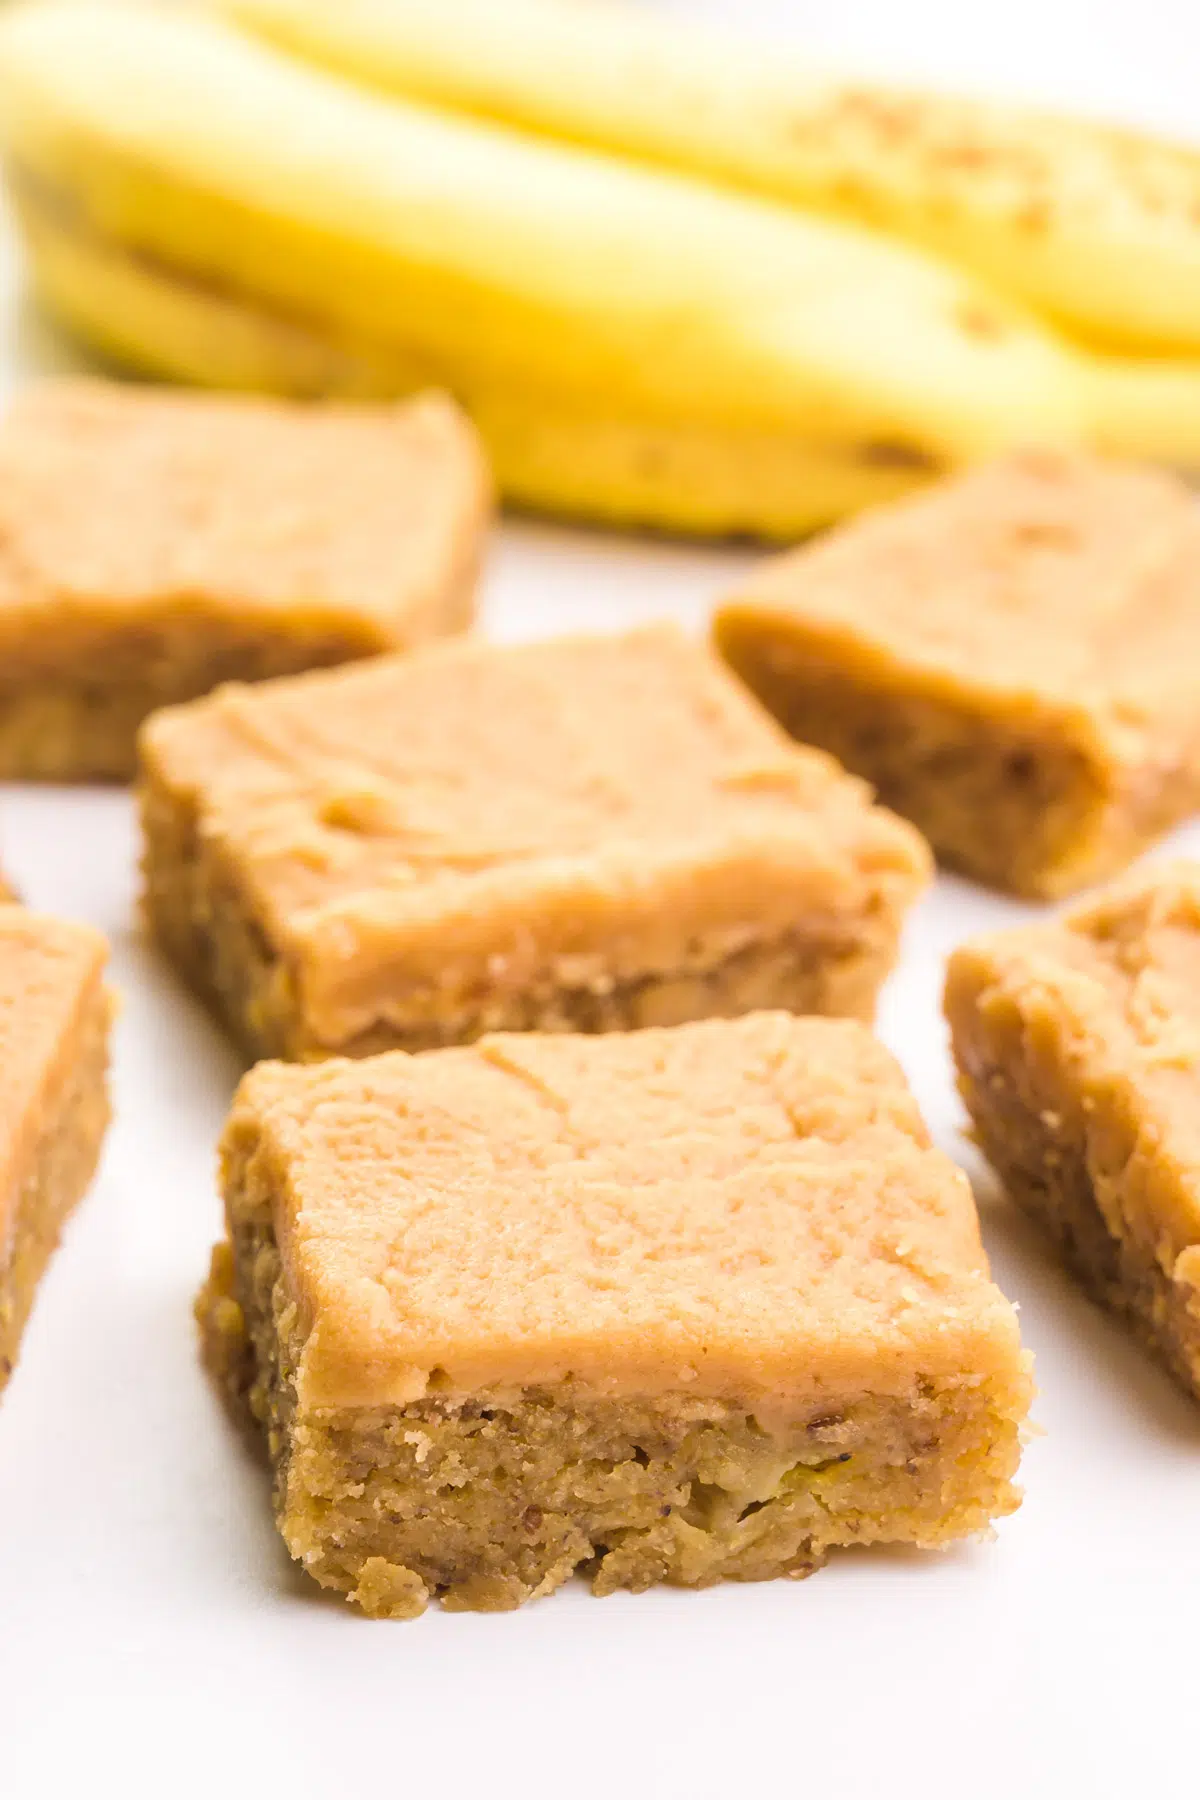 Slices of banana brownies sit in front of yellow bananas.